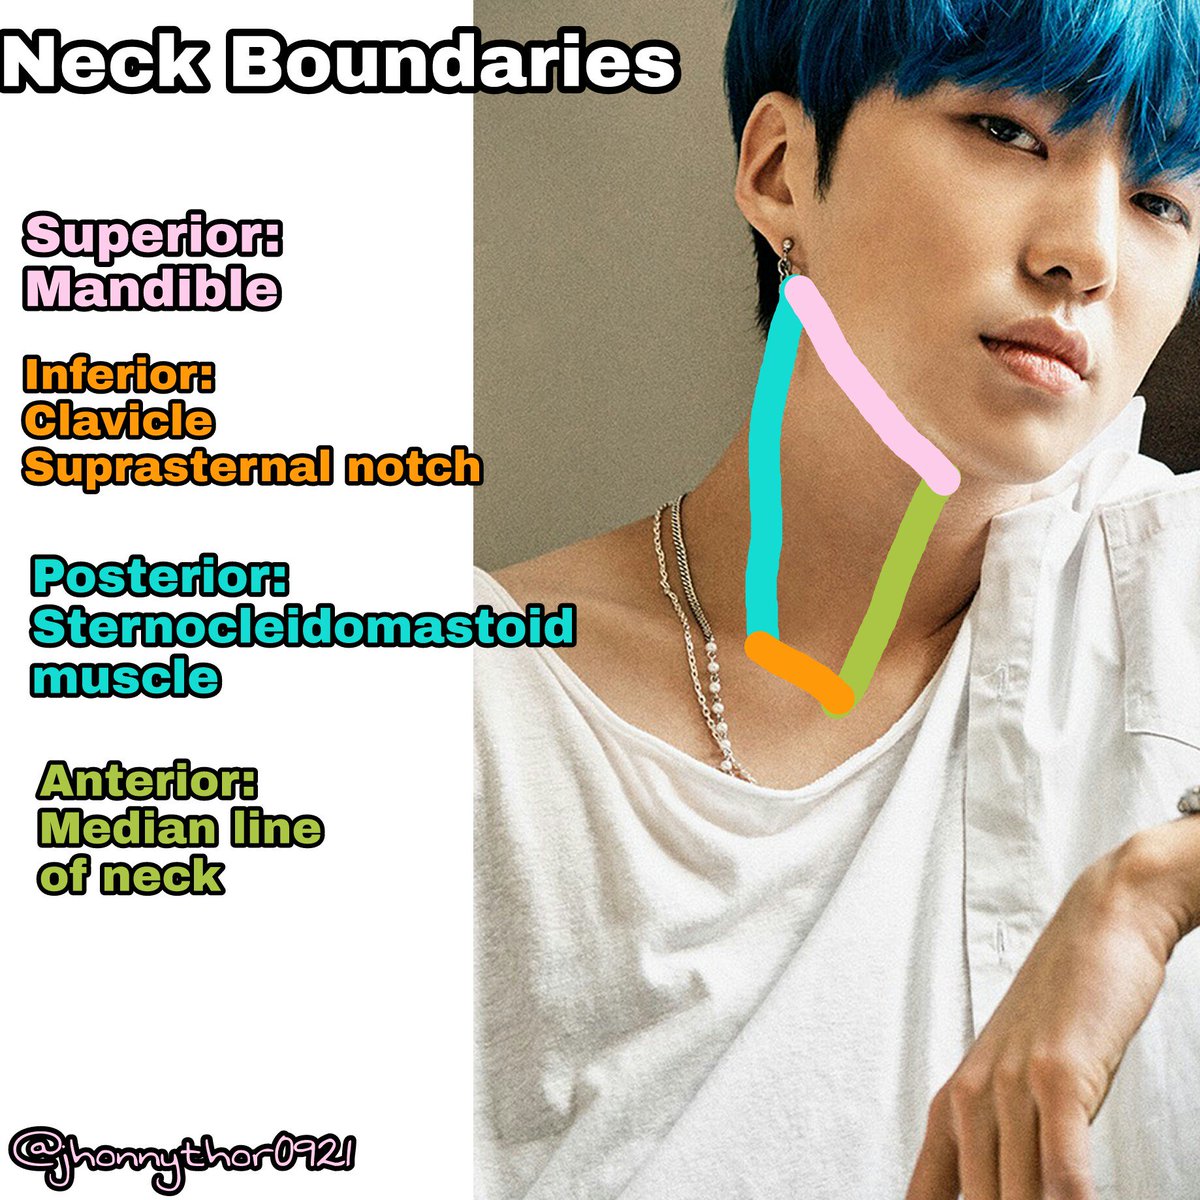 15. Neck Boundaries with my favorite neck modelI've been studying too much bananas that I missed doing this thing .  #ForEducationalPurpose